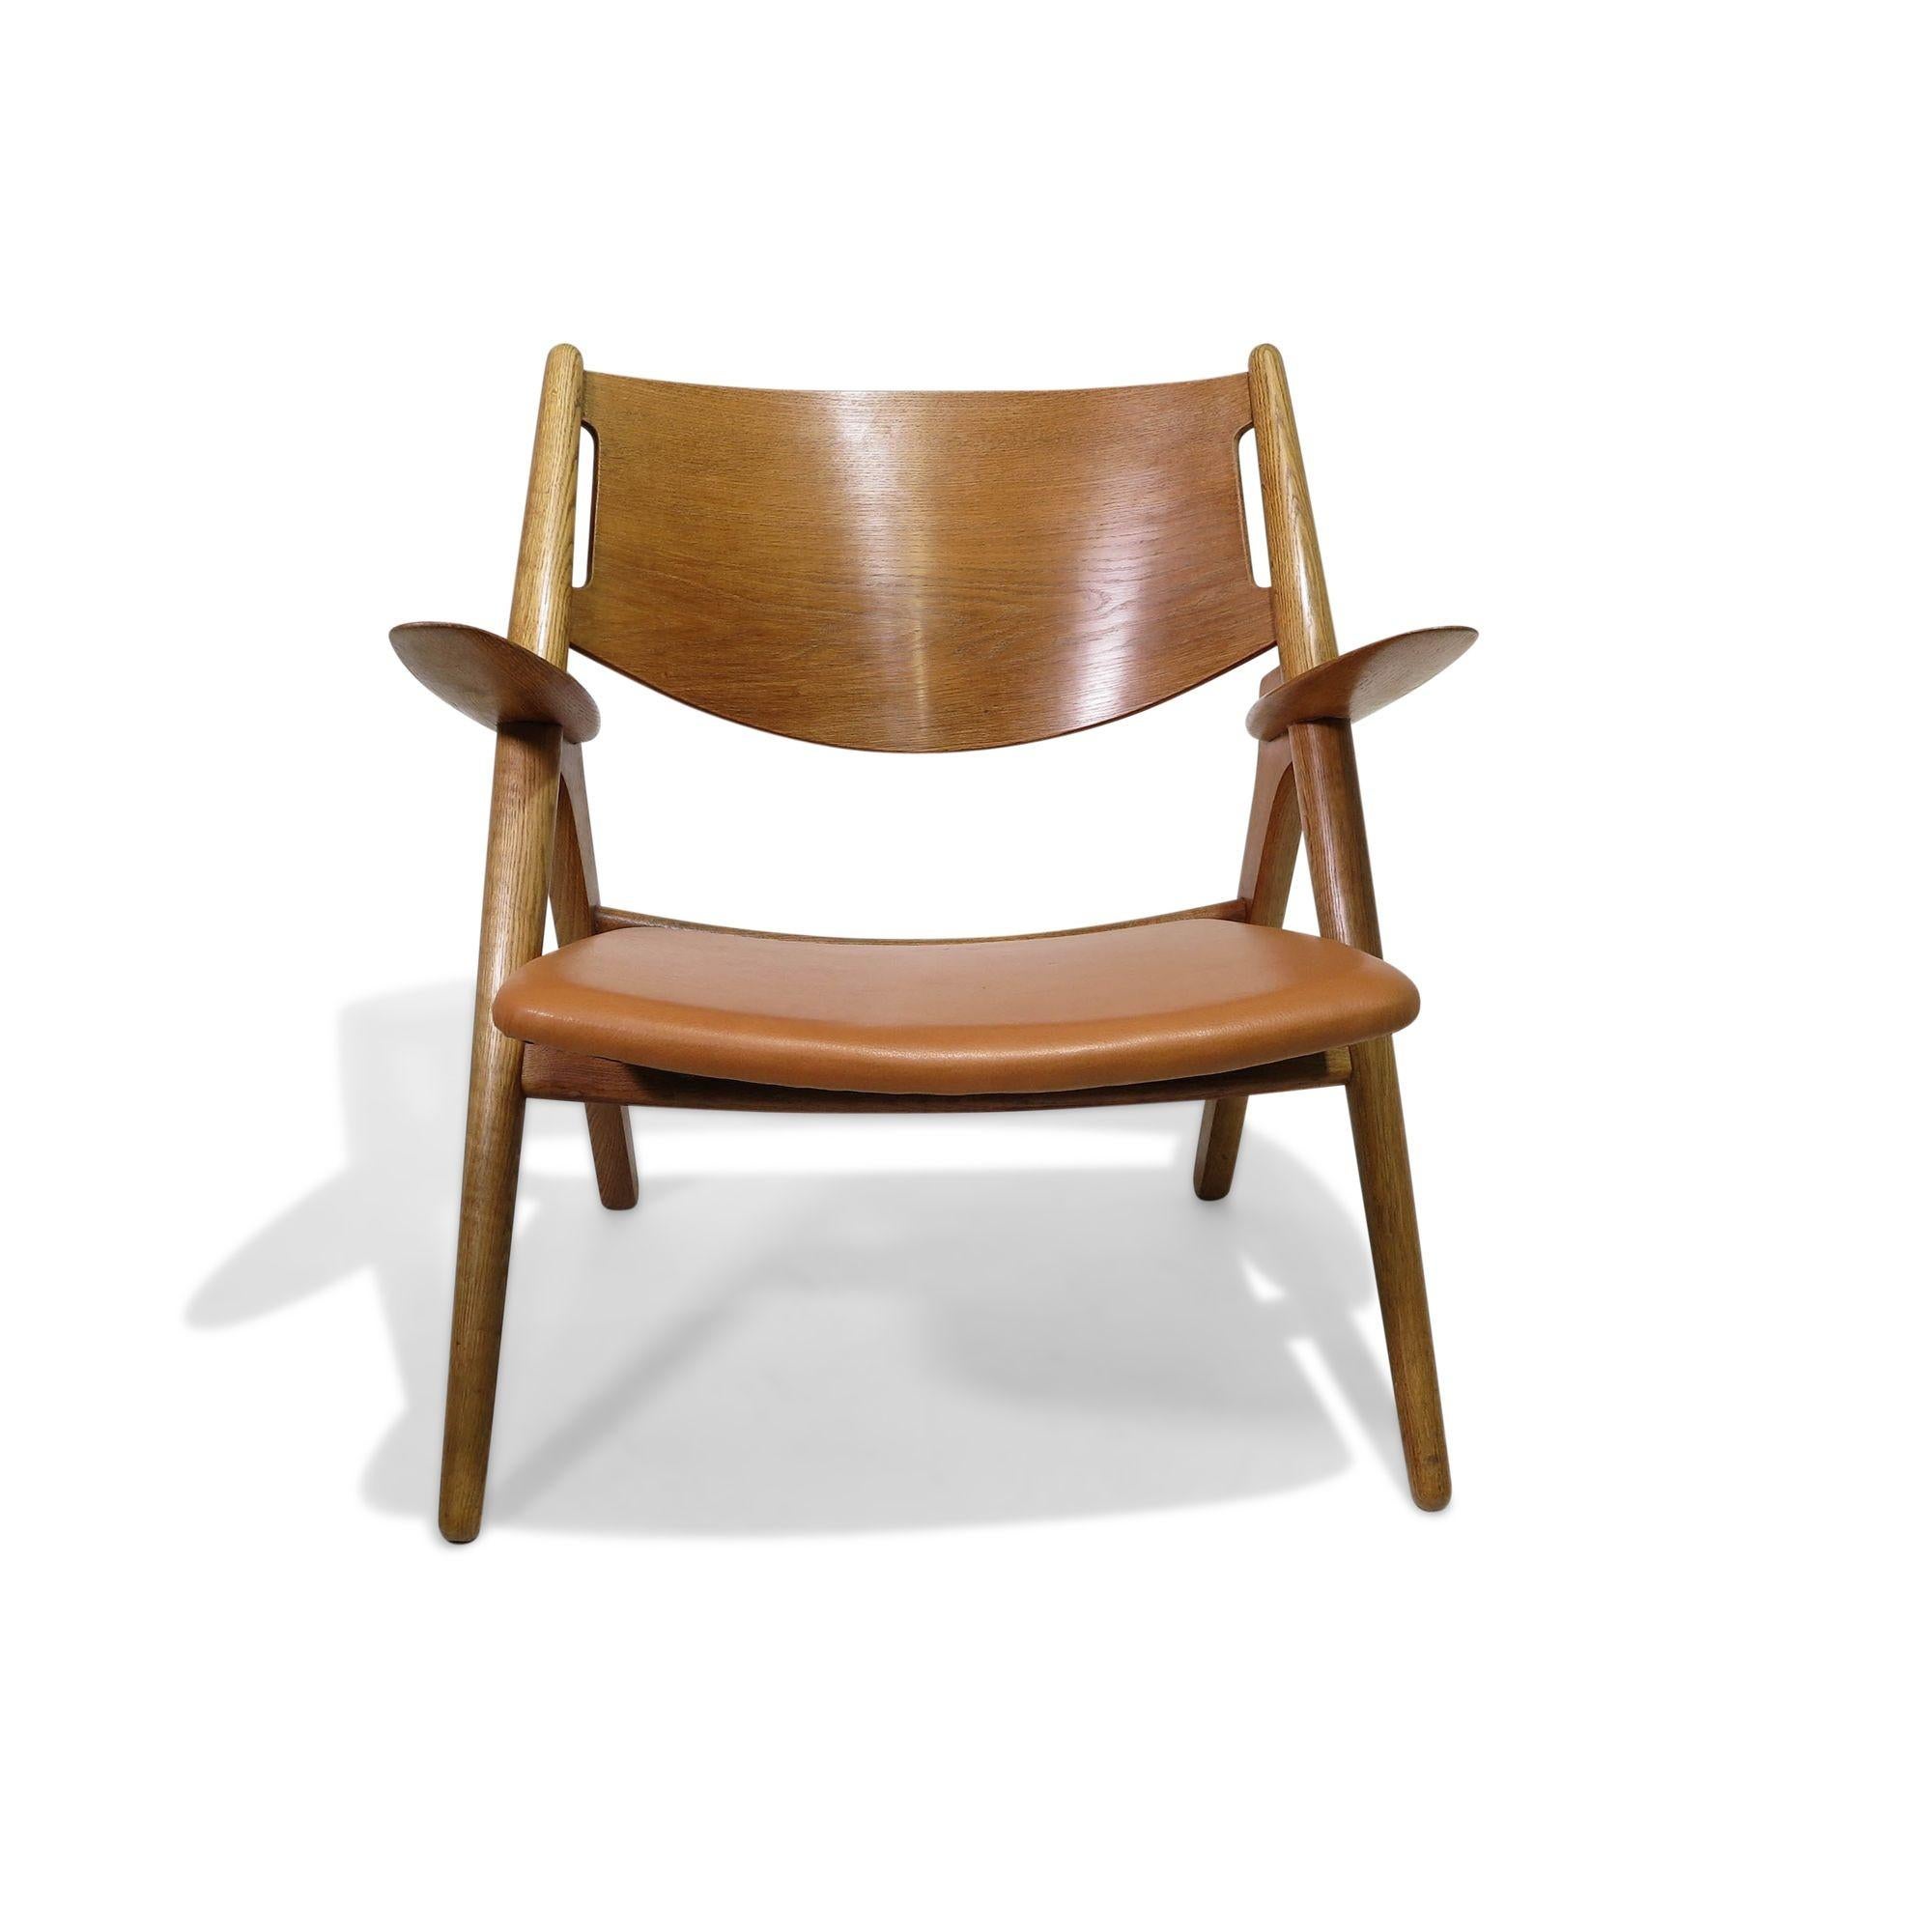 Model CH28, “Sawbuck” chair designed by Hans Wegner and produced by Carl Hansen in Denmark, 1951. The chair features a simple and elegant design, with a distinctive X-shaped frame that gives it a modern, yet timeless, appearance. The chair's